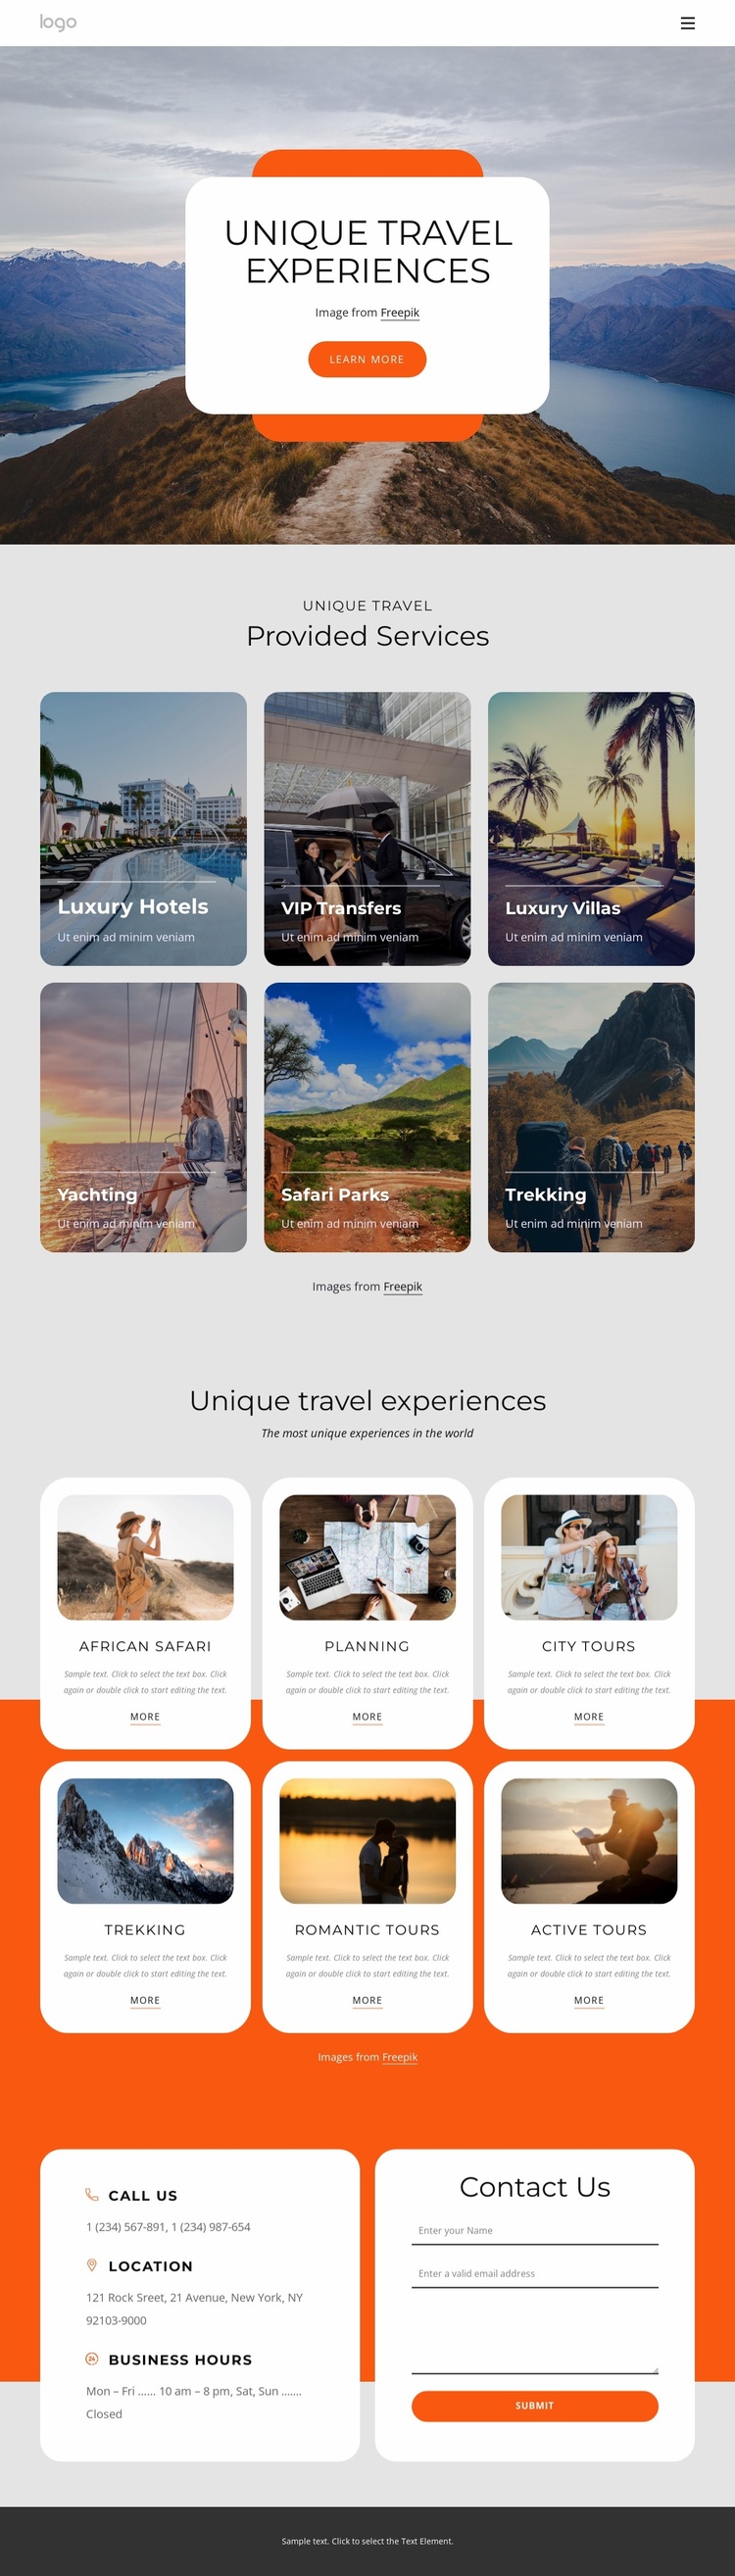 Luxury small-group travel experience Website Template